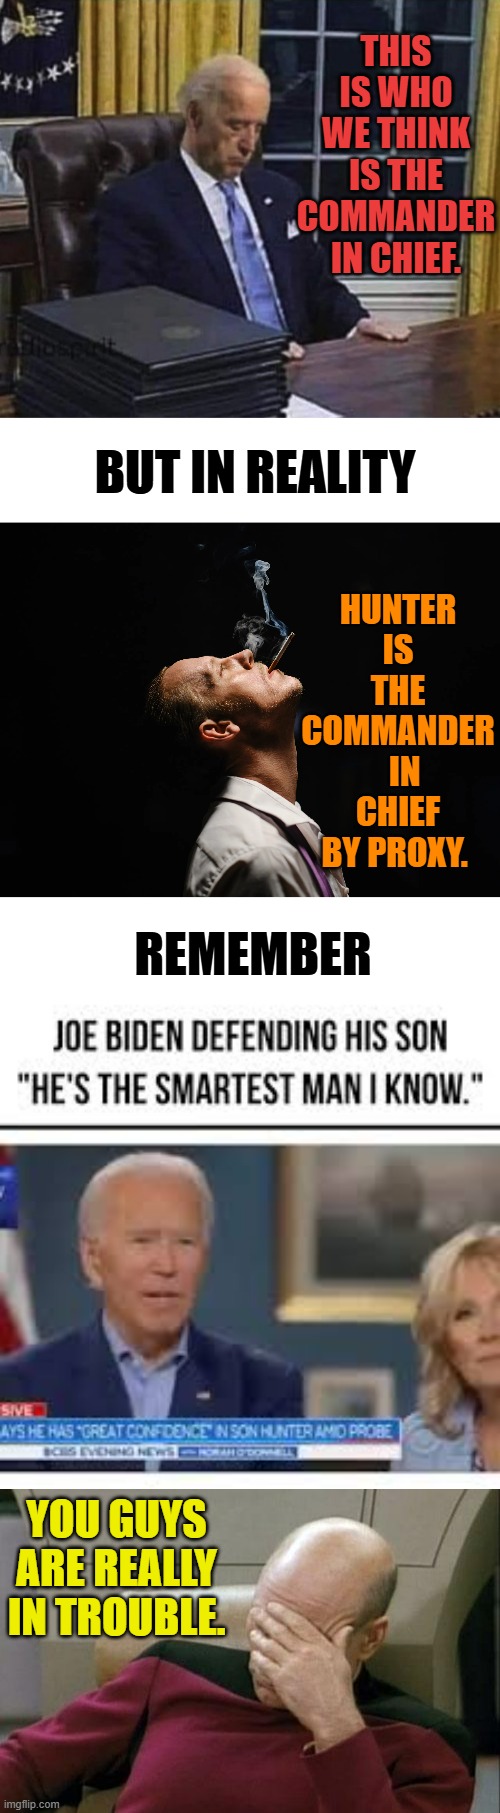 Sound About Right? | THIS IS WHO WE THINK IS THE COMMANDER IN CHIEF. BUT IN REALITY; HUNTER IS THE COMMANDER   IN CHIEF BY PROXY. REMEMBER; YOU GUYS ARE REALLY IN TROUBLE. | image tagged in memes,politics,joe biden,hunter biden,smart guy,big trouble | made w/ Imgflip meme maker